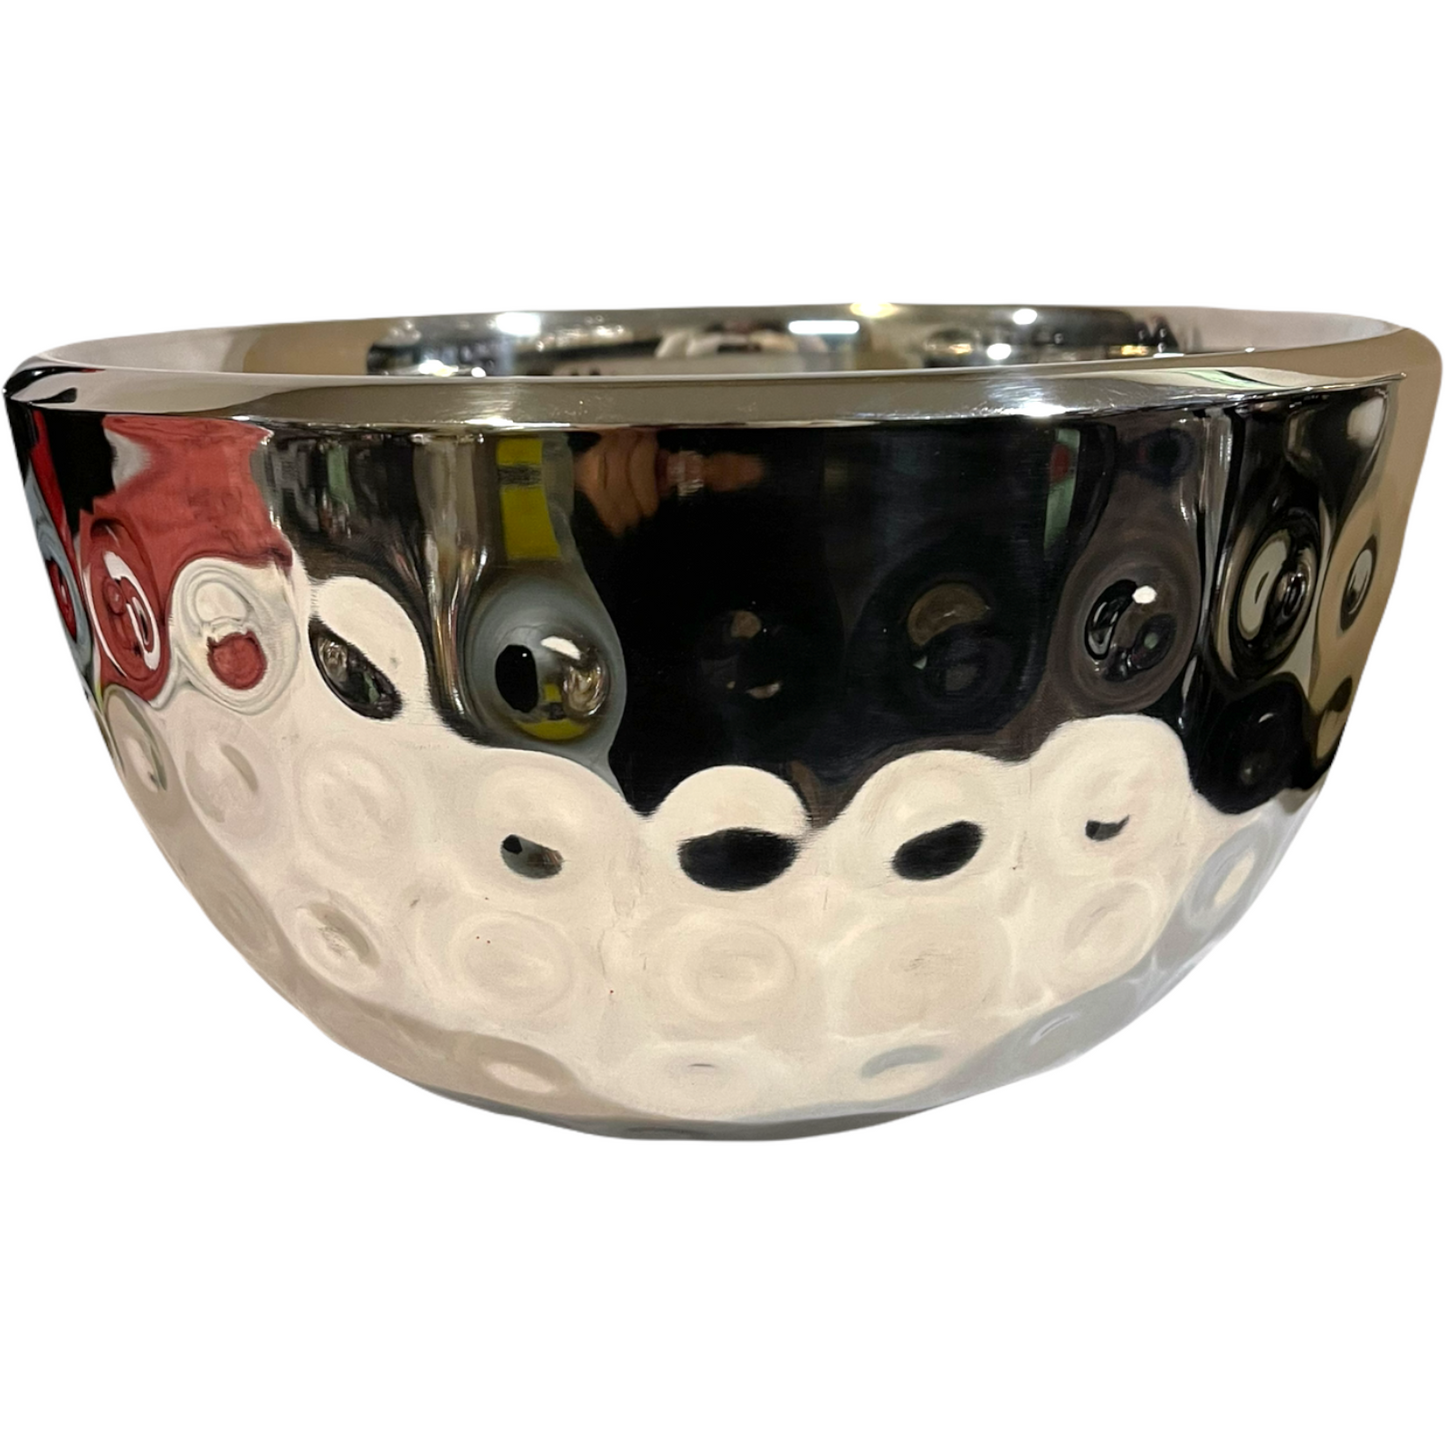 METAL DOUBLE WALLED BOWL